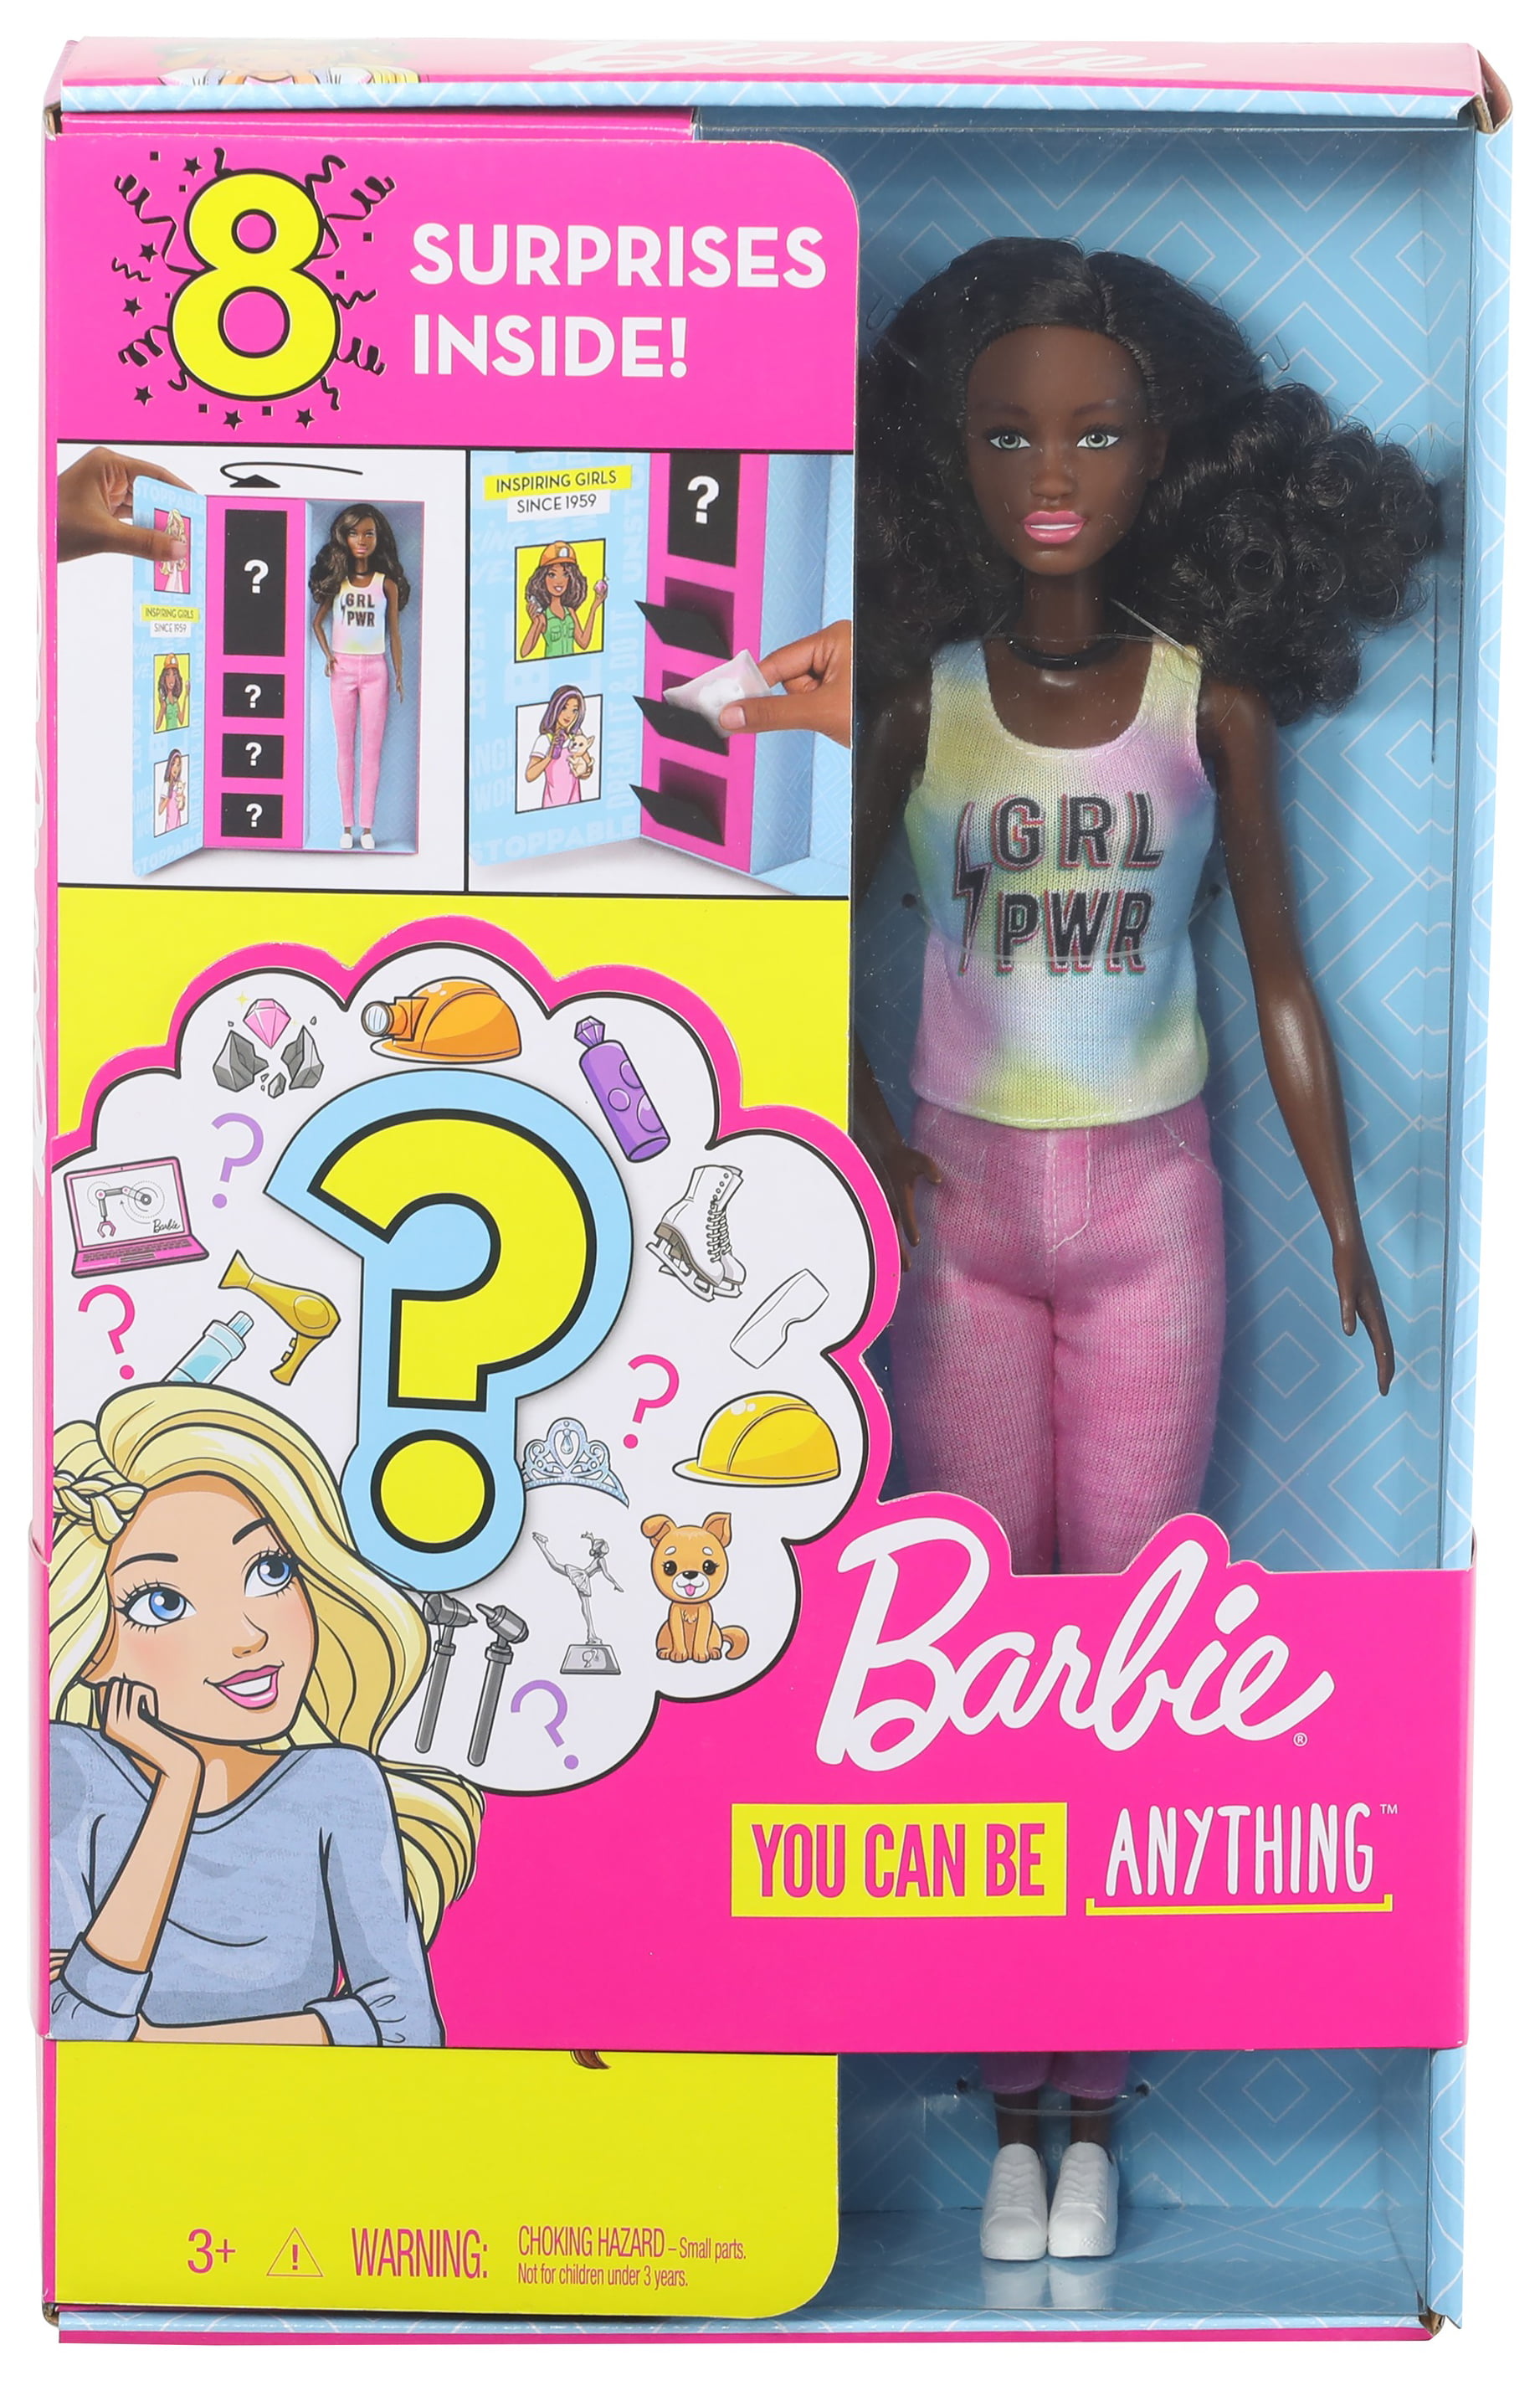 8 BARBIE Girl Power SURPRISES INSIDE  You can be anything  Brand New 